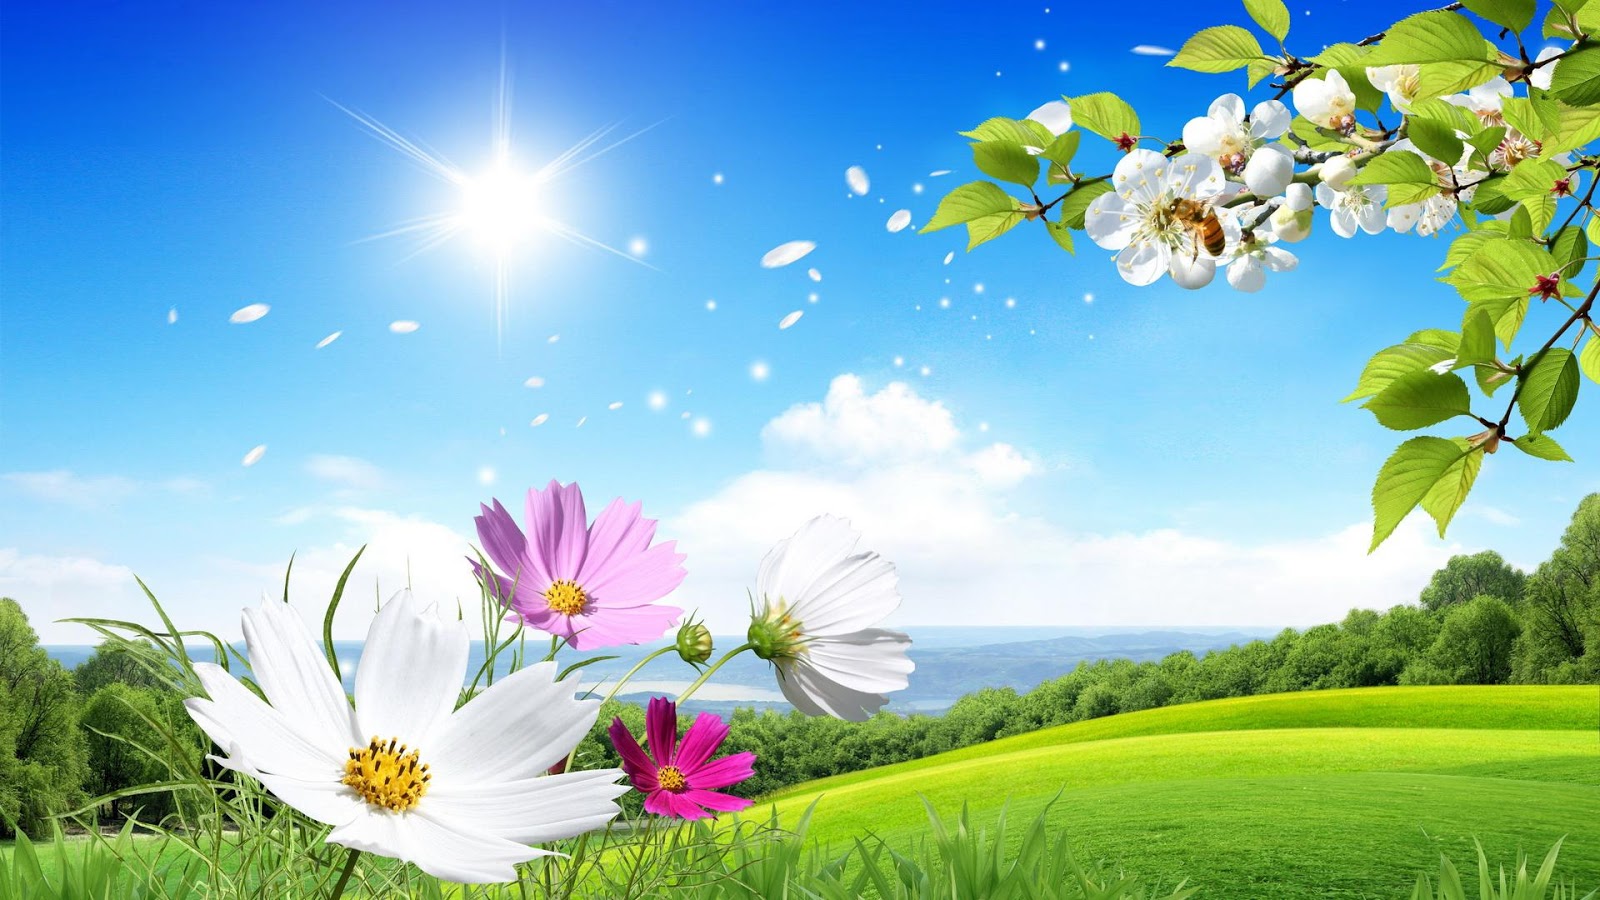 flowers for flower lovers Flowers wallpapers natural sceneries